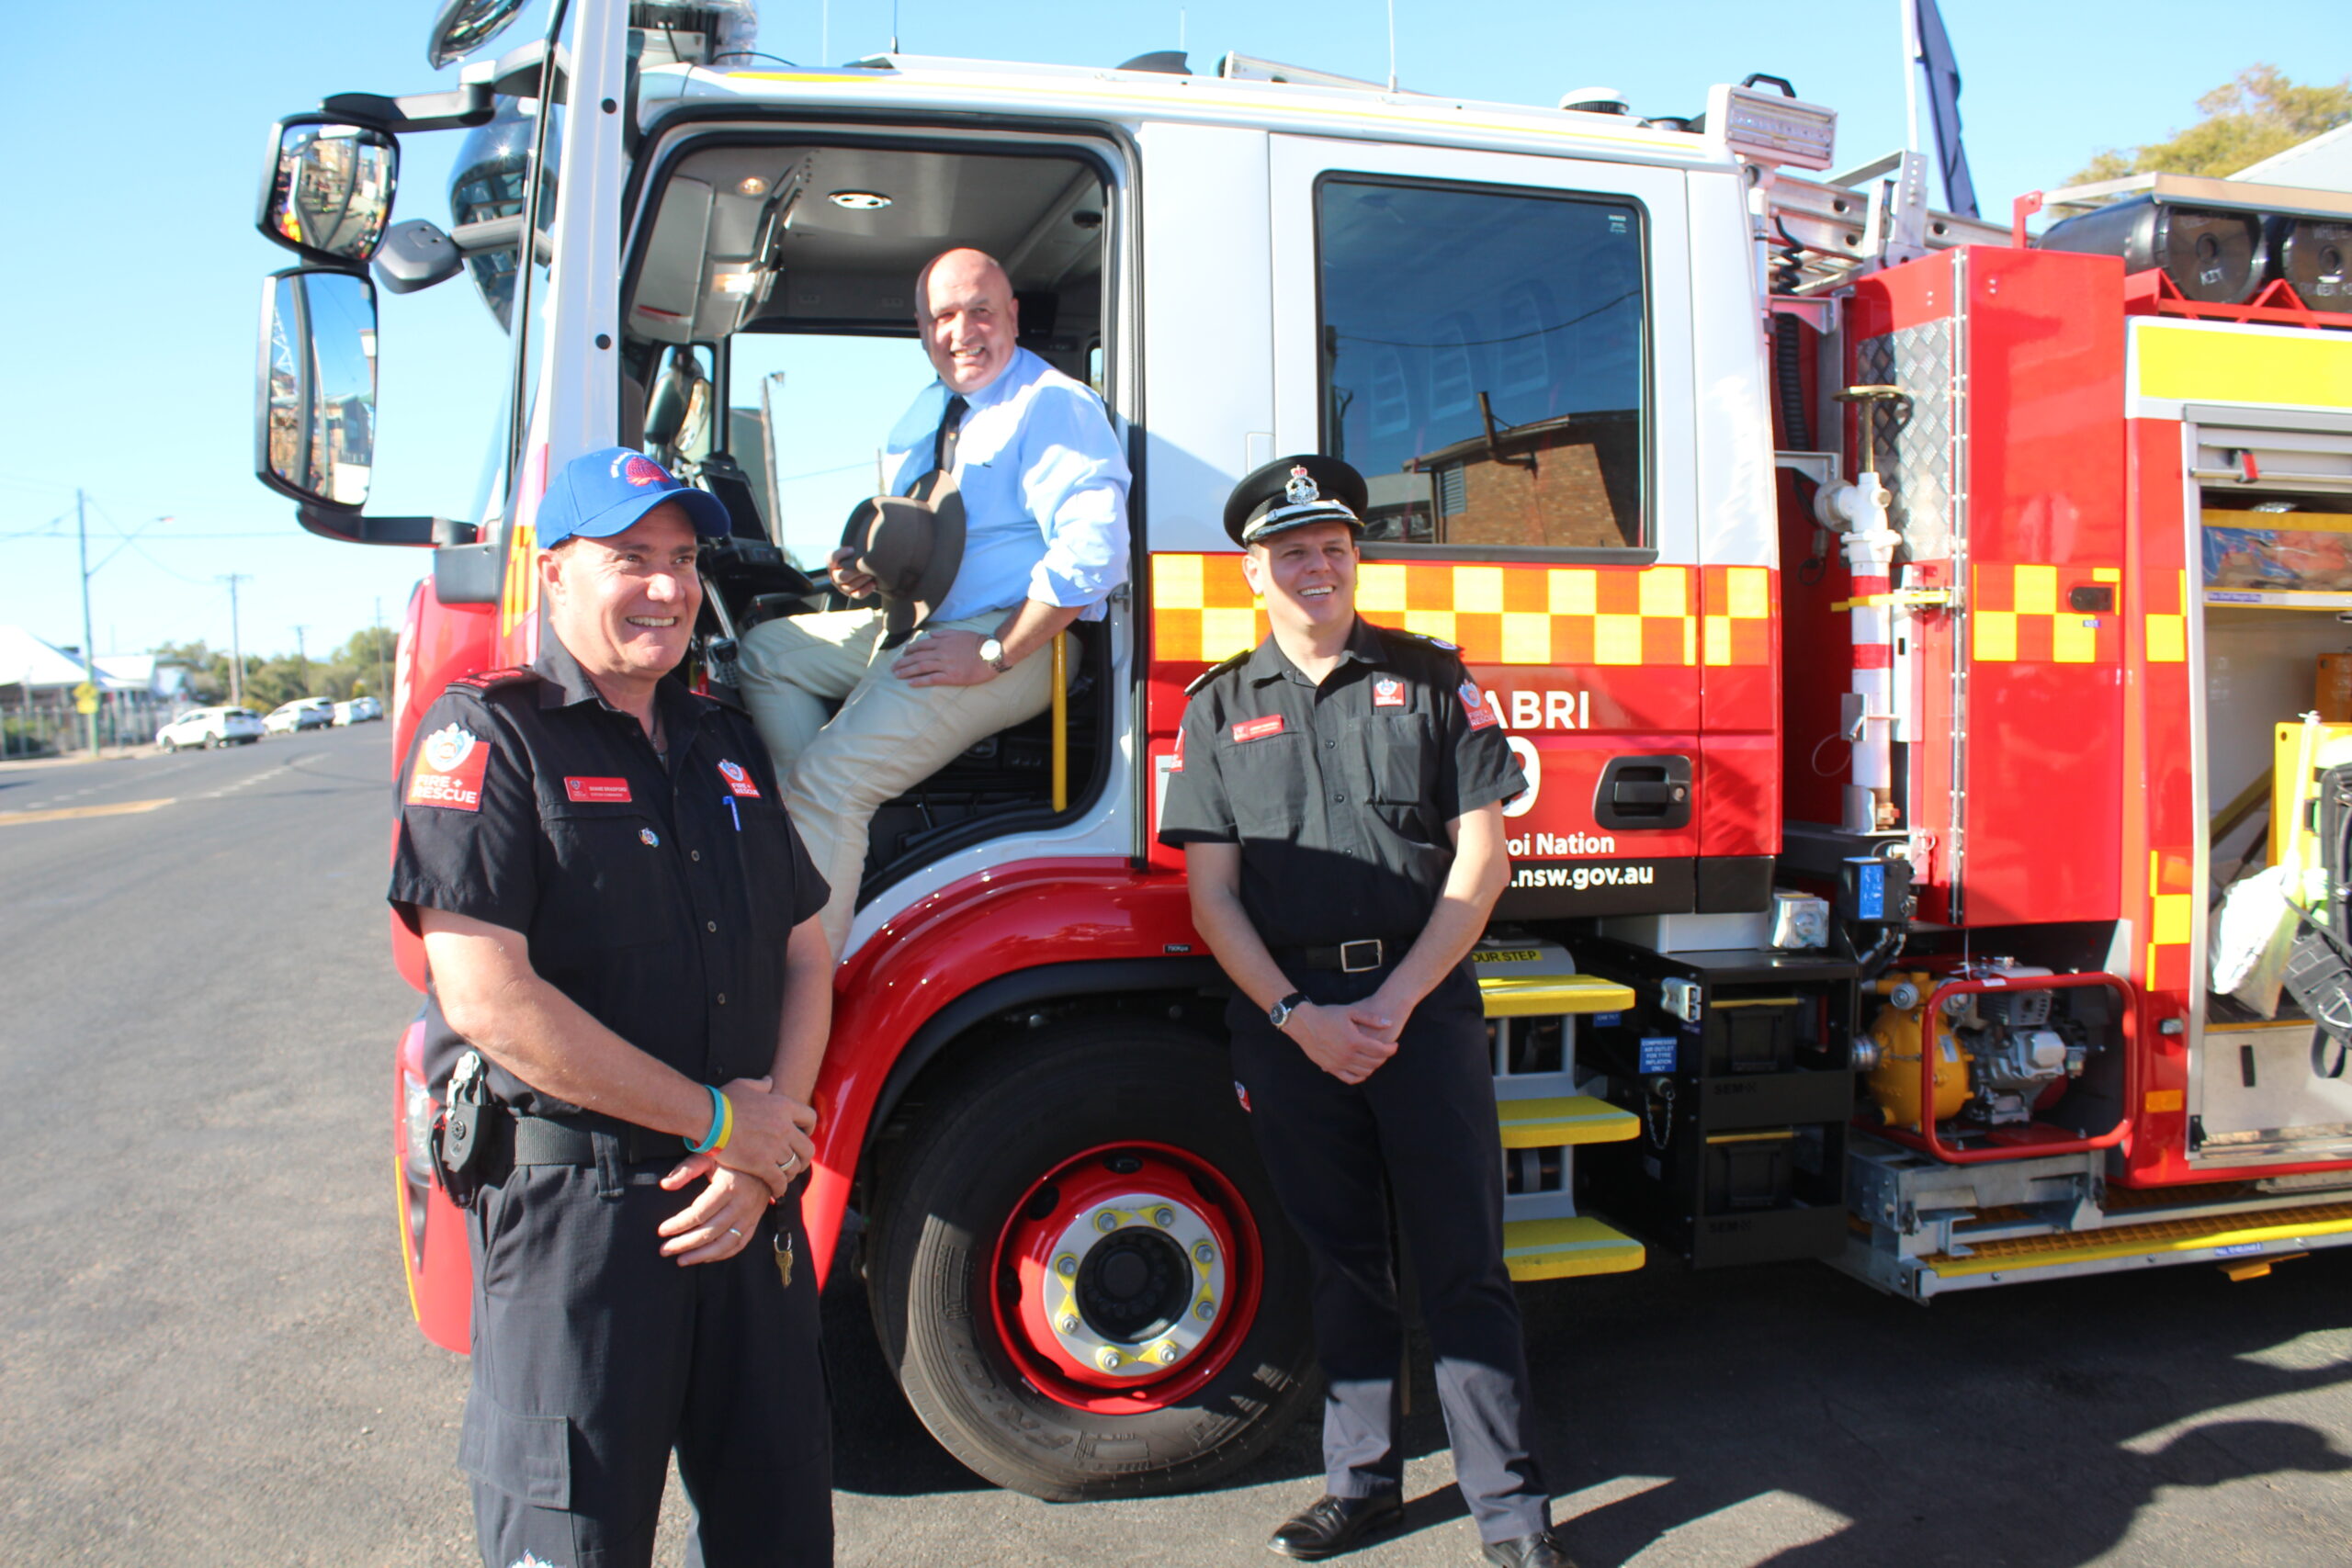 New state-of-the-art fire unit ready for emergencies